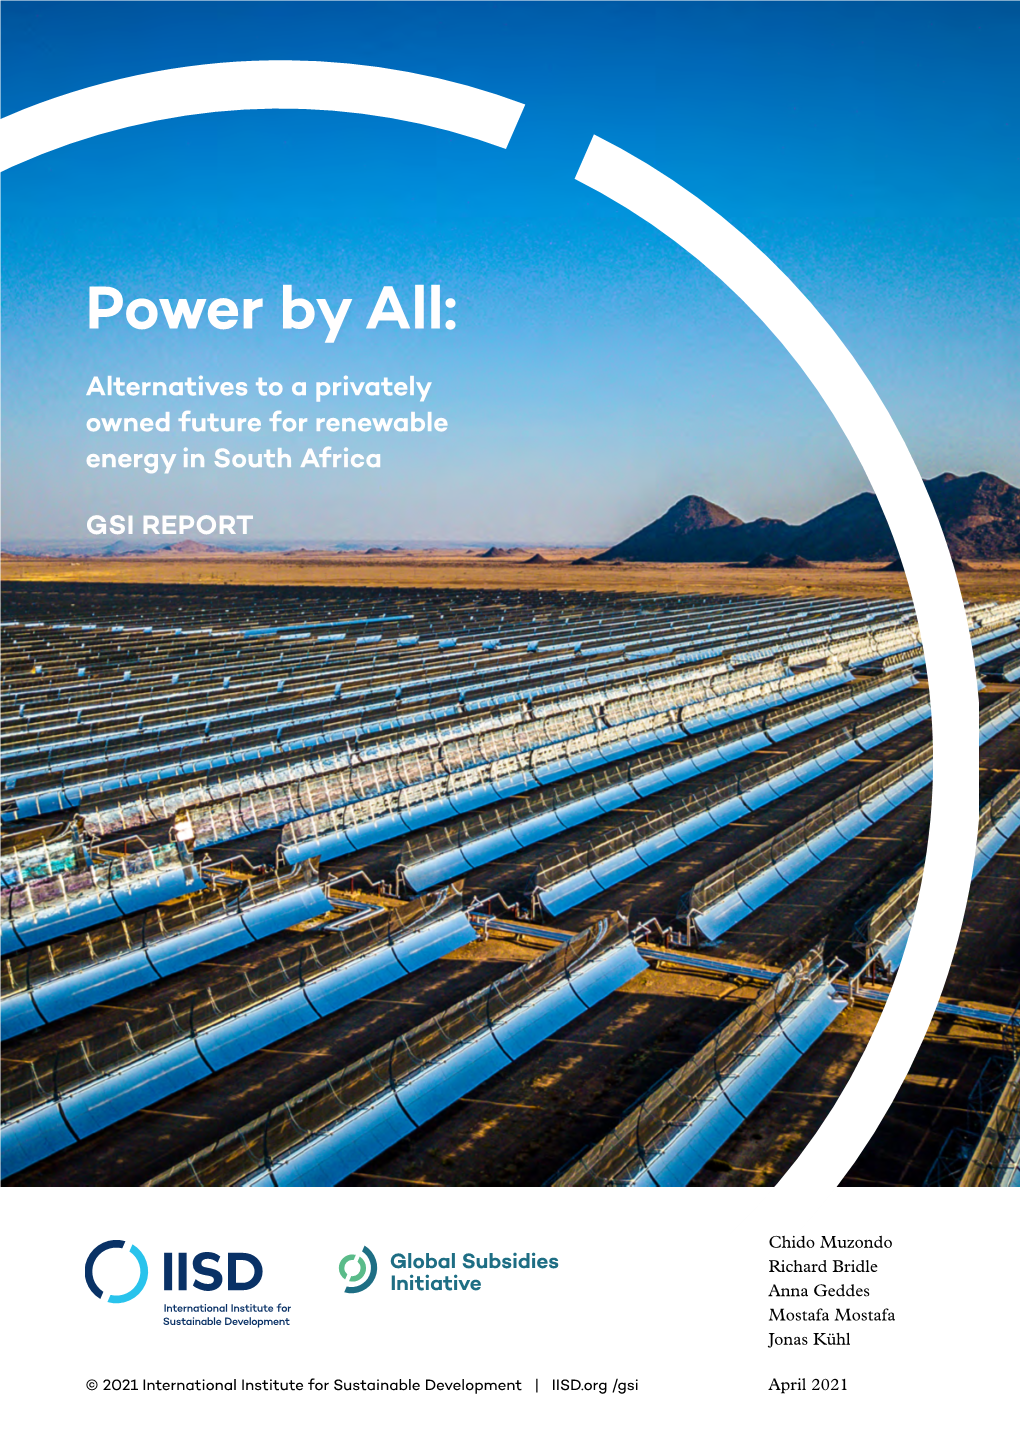 Power by All: Alternatives to a Privately Owned Future for Renewable Energy in South Africa